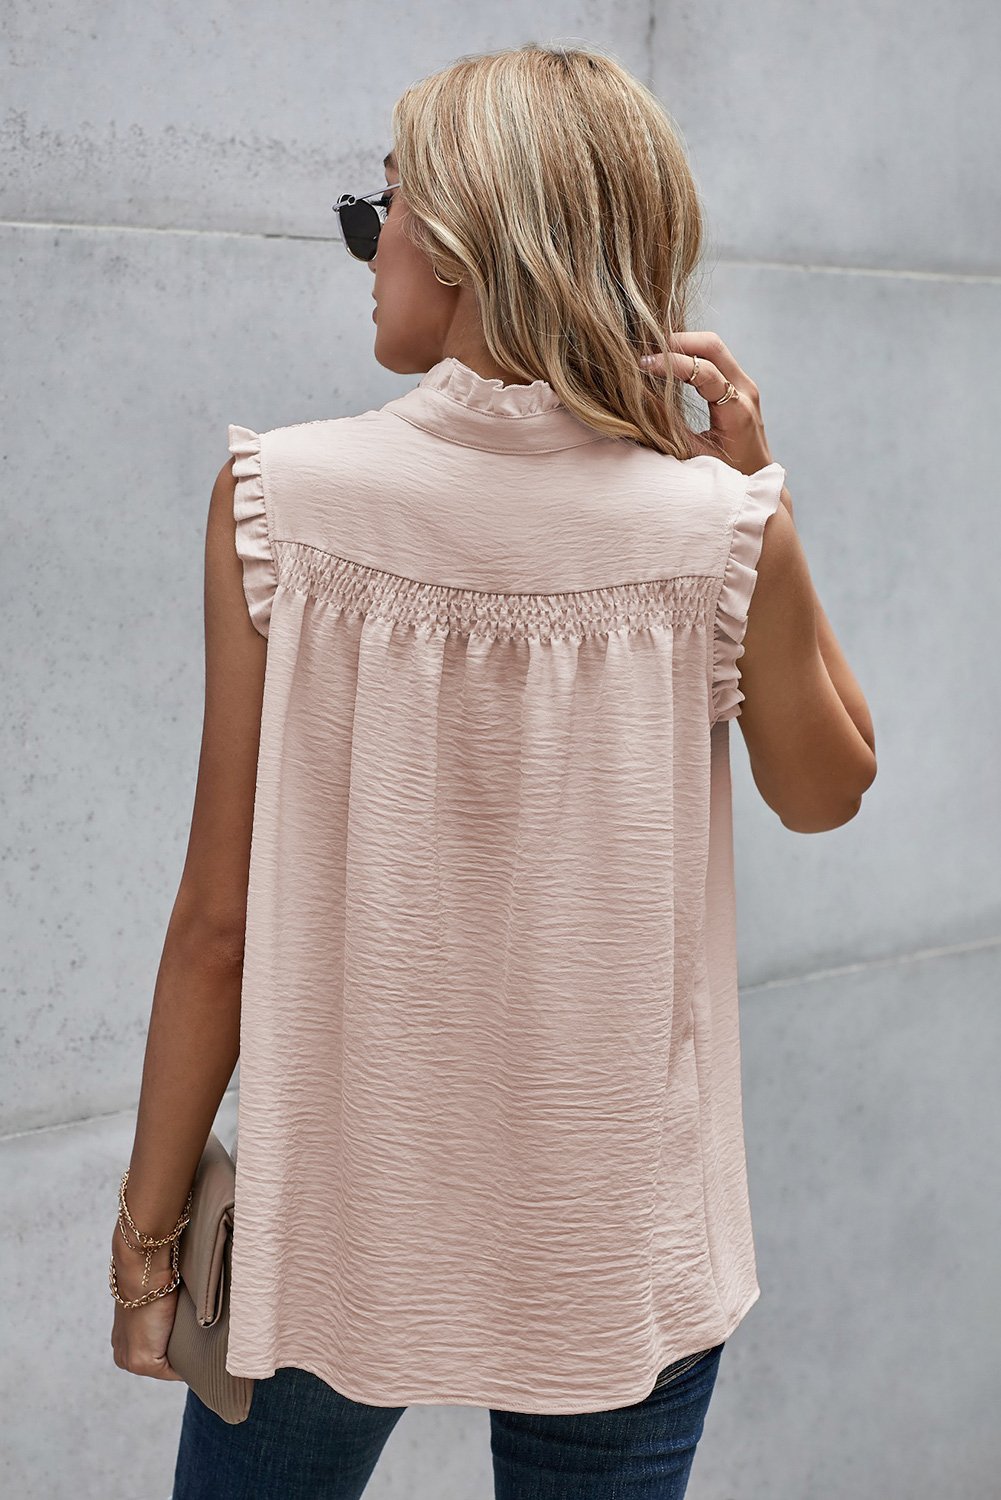 Apricot Frilled Tank Top with Buttons Apricot Frilled Tank Top with Buttons - M&R CORNERTop Trendsi